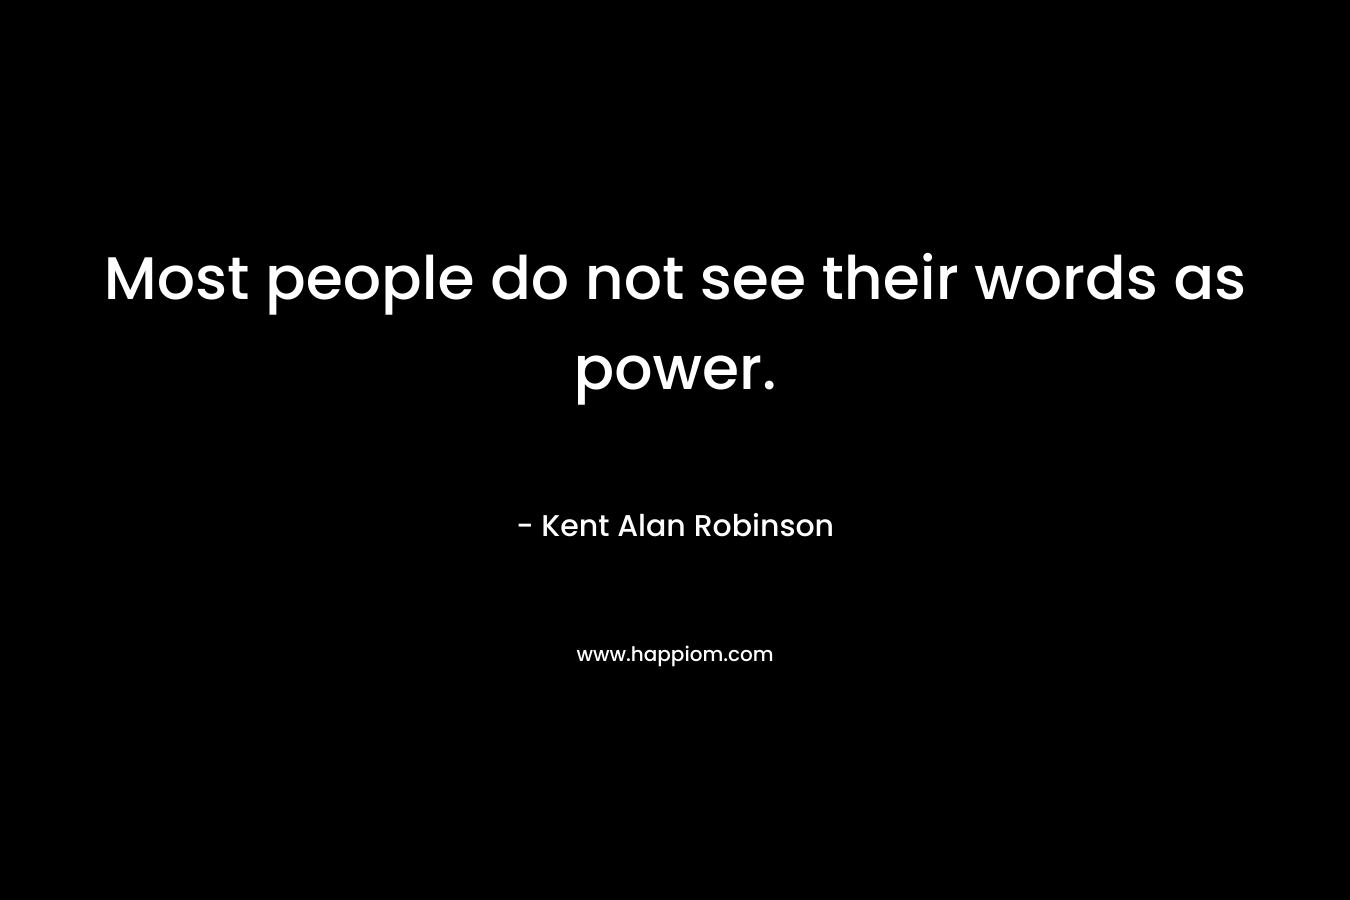 Most people do not see their words as power.